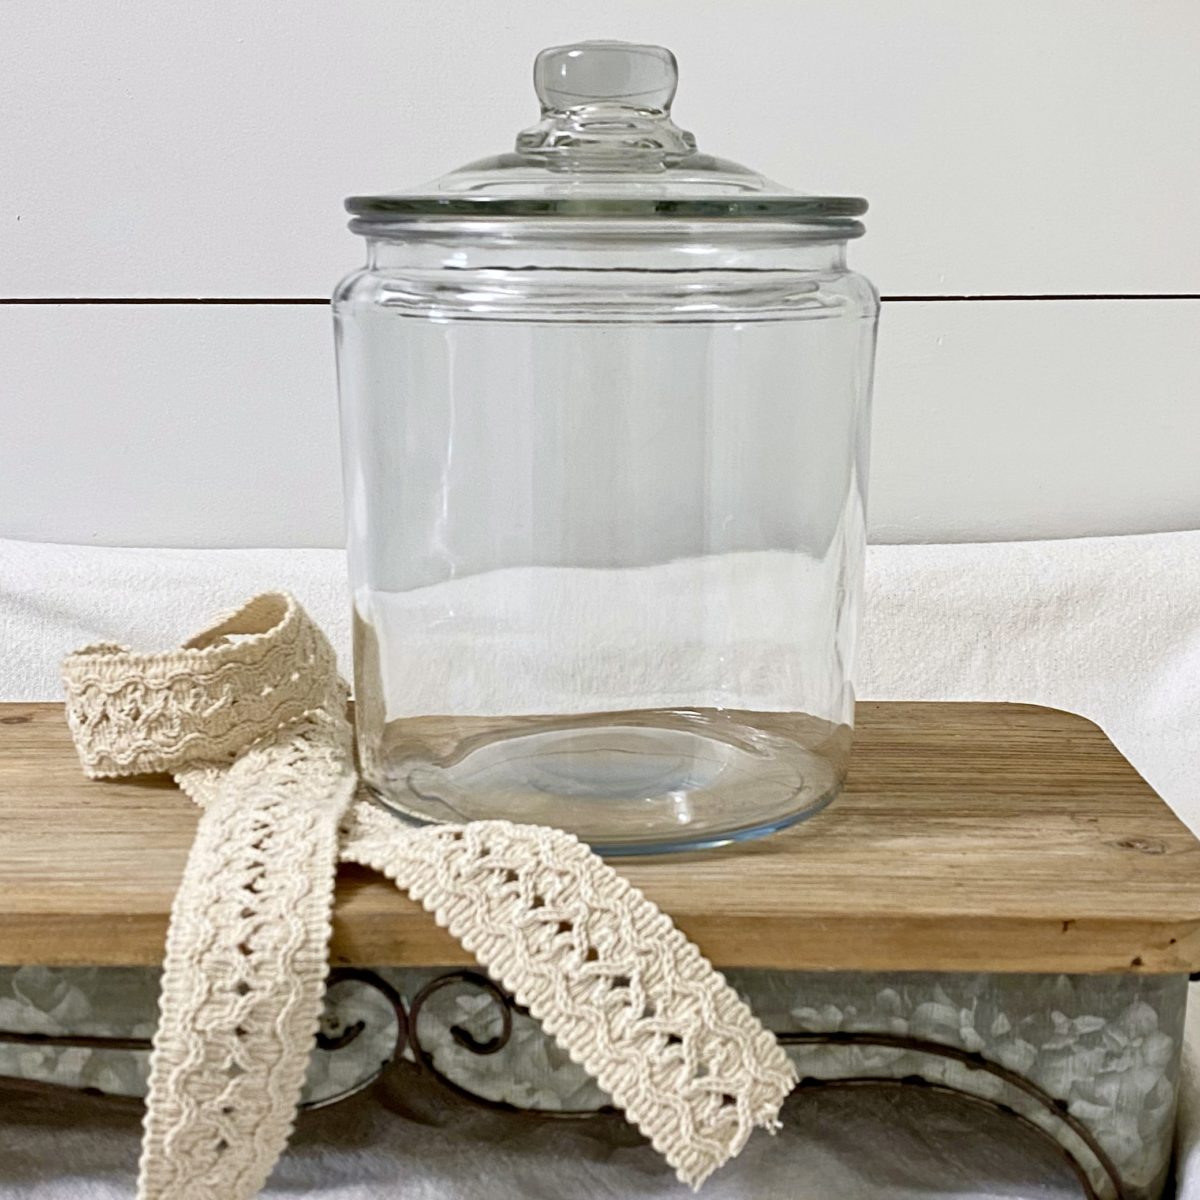 A clear glass jar and ribbon on a riser to make a new year memory jar.